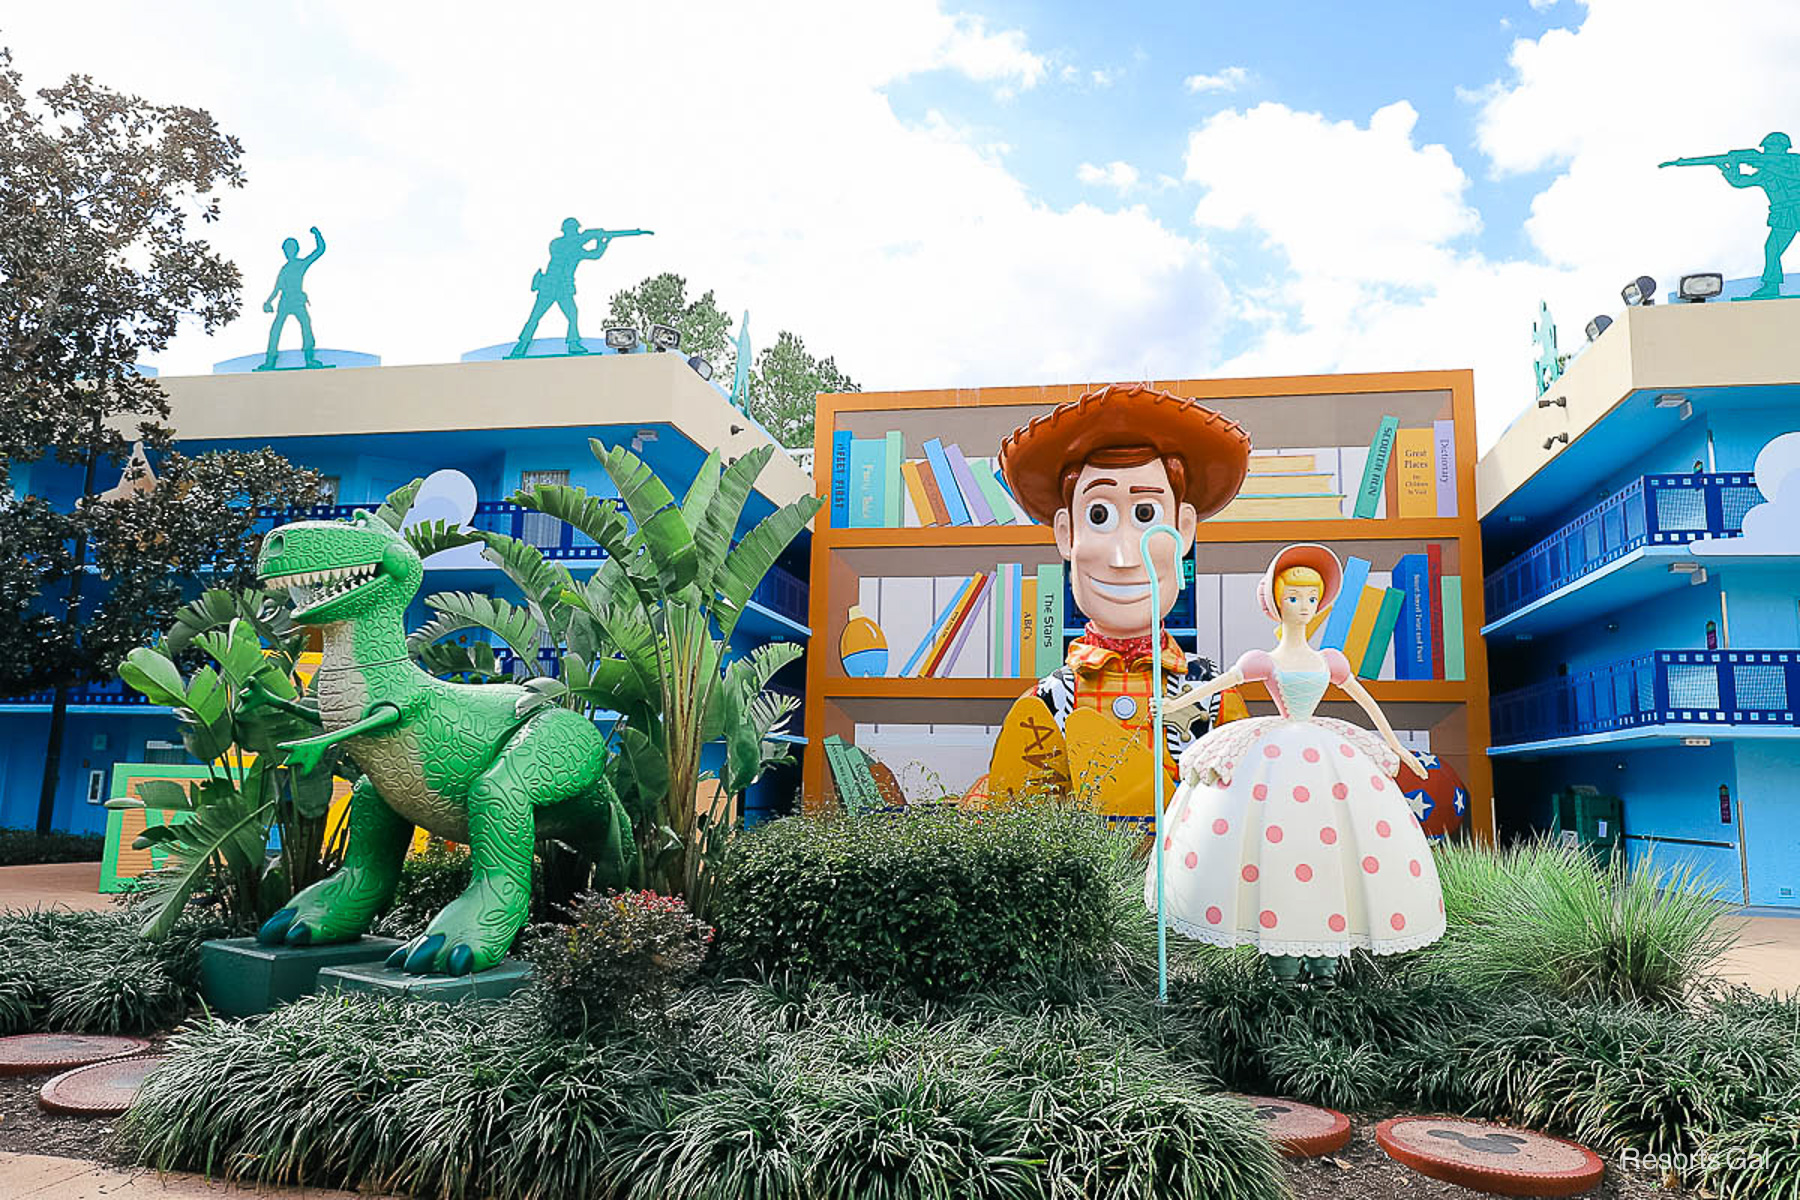 Woody, Bo Peep and Rex in the All-Star Movies Toy Story area 